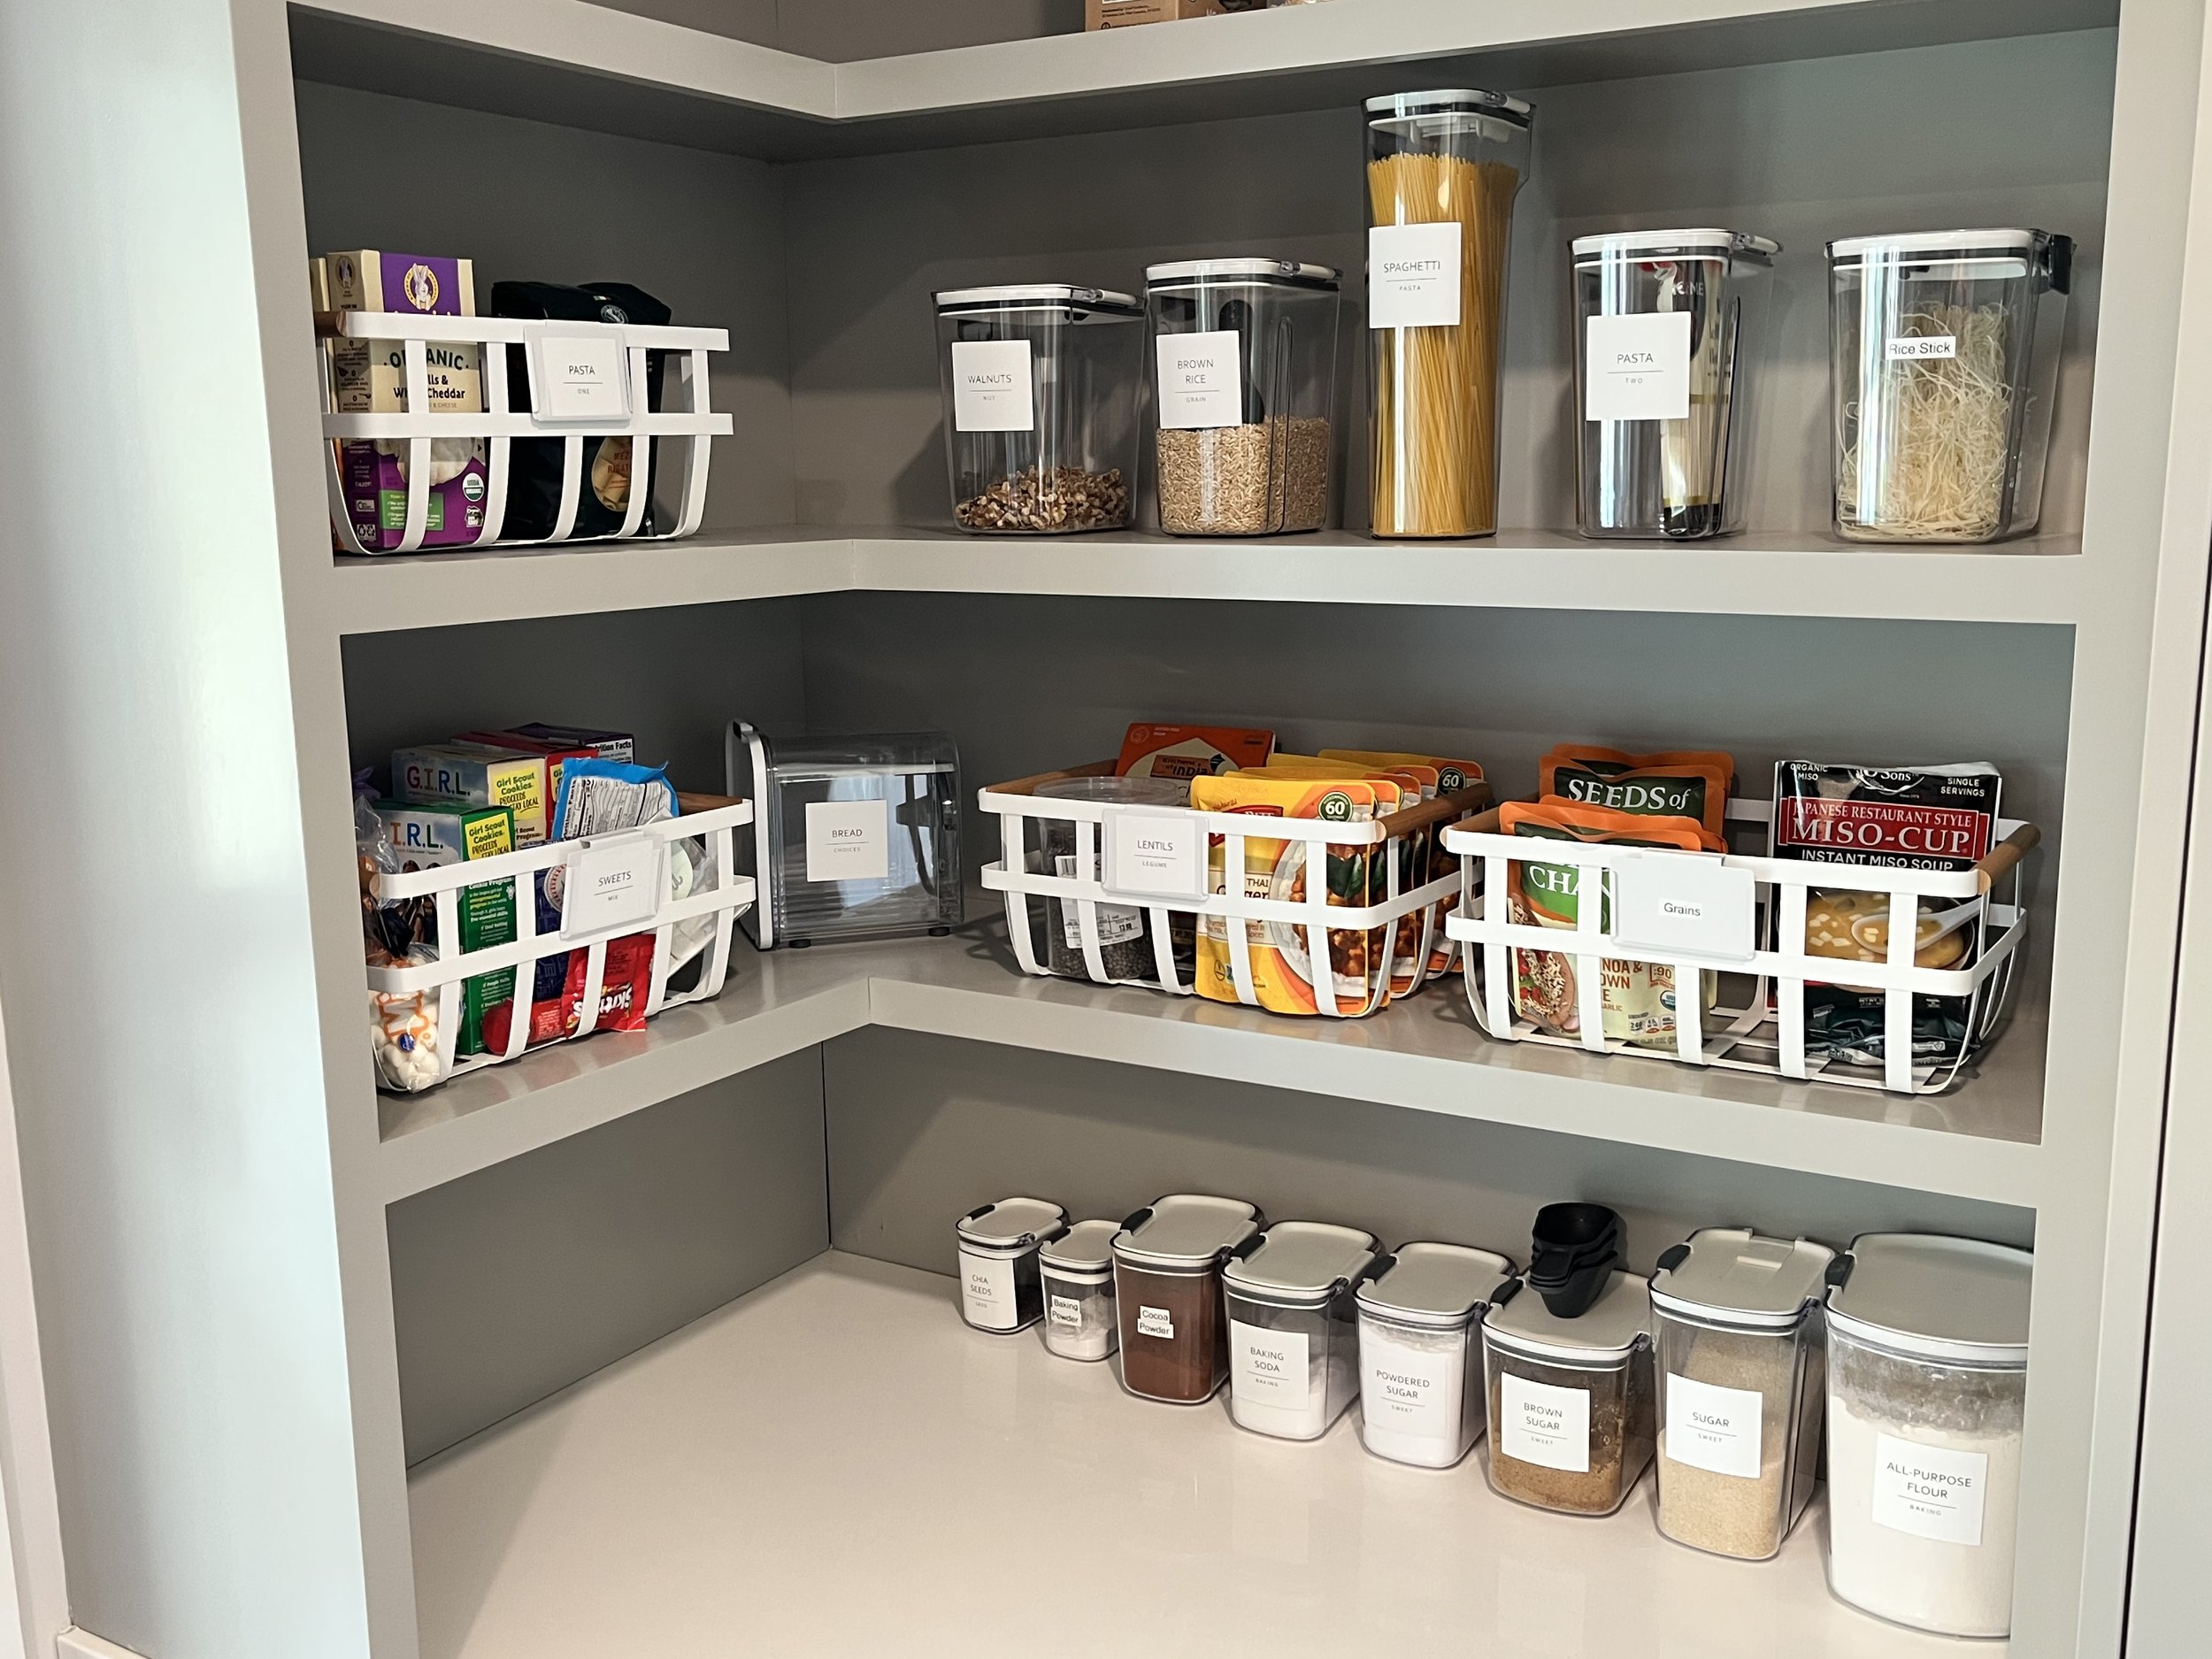 Pantry Organization Tips & Ideas - One Happy Housewife